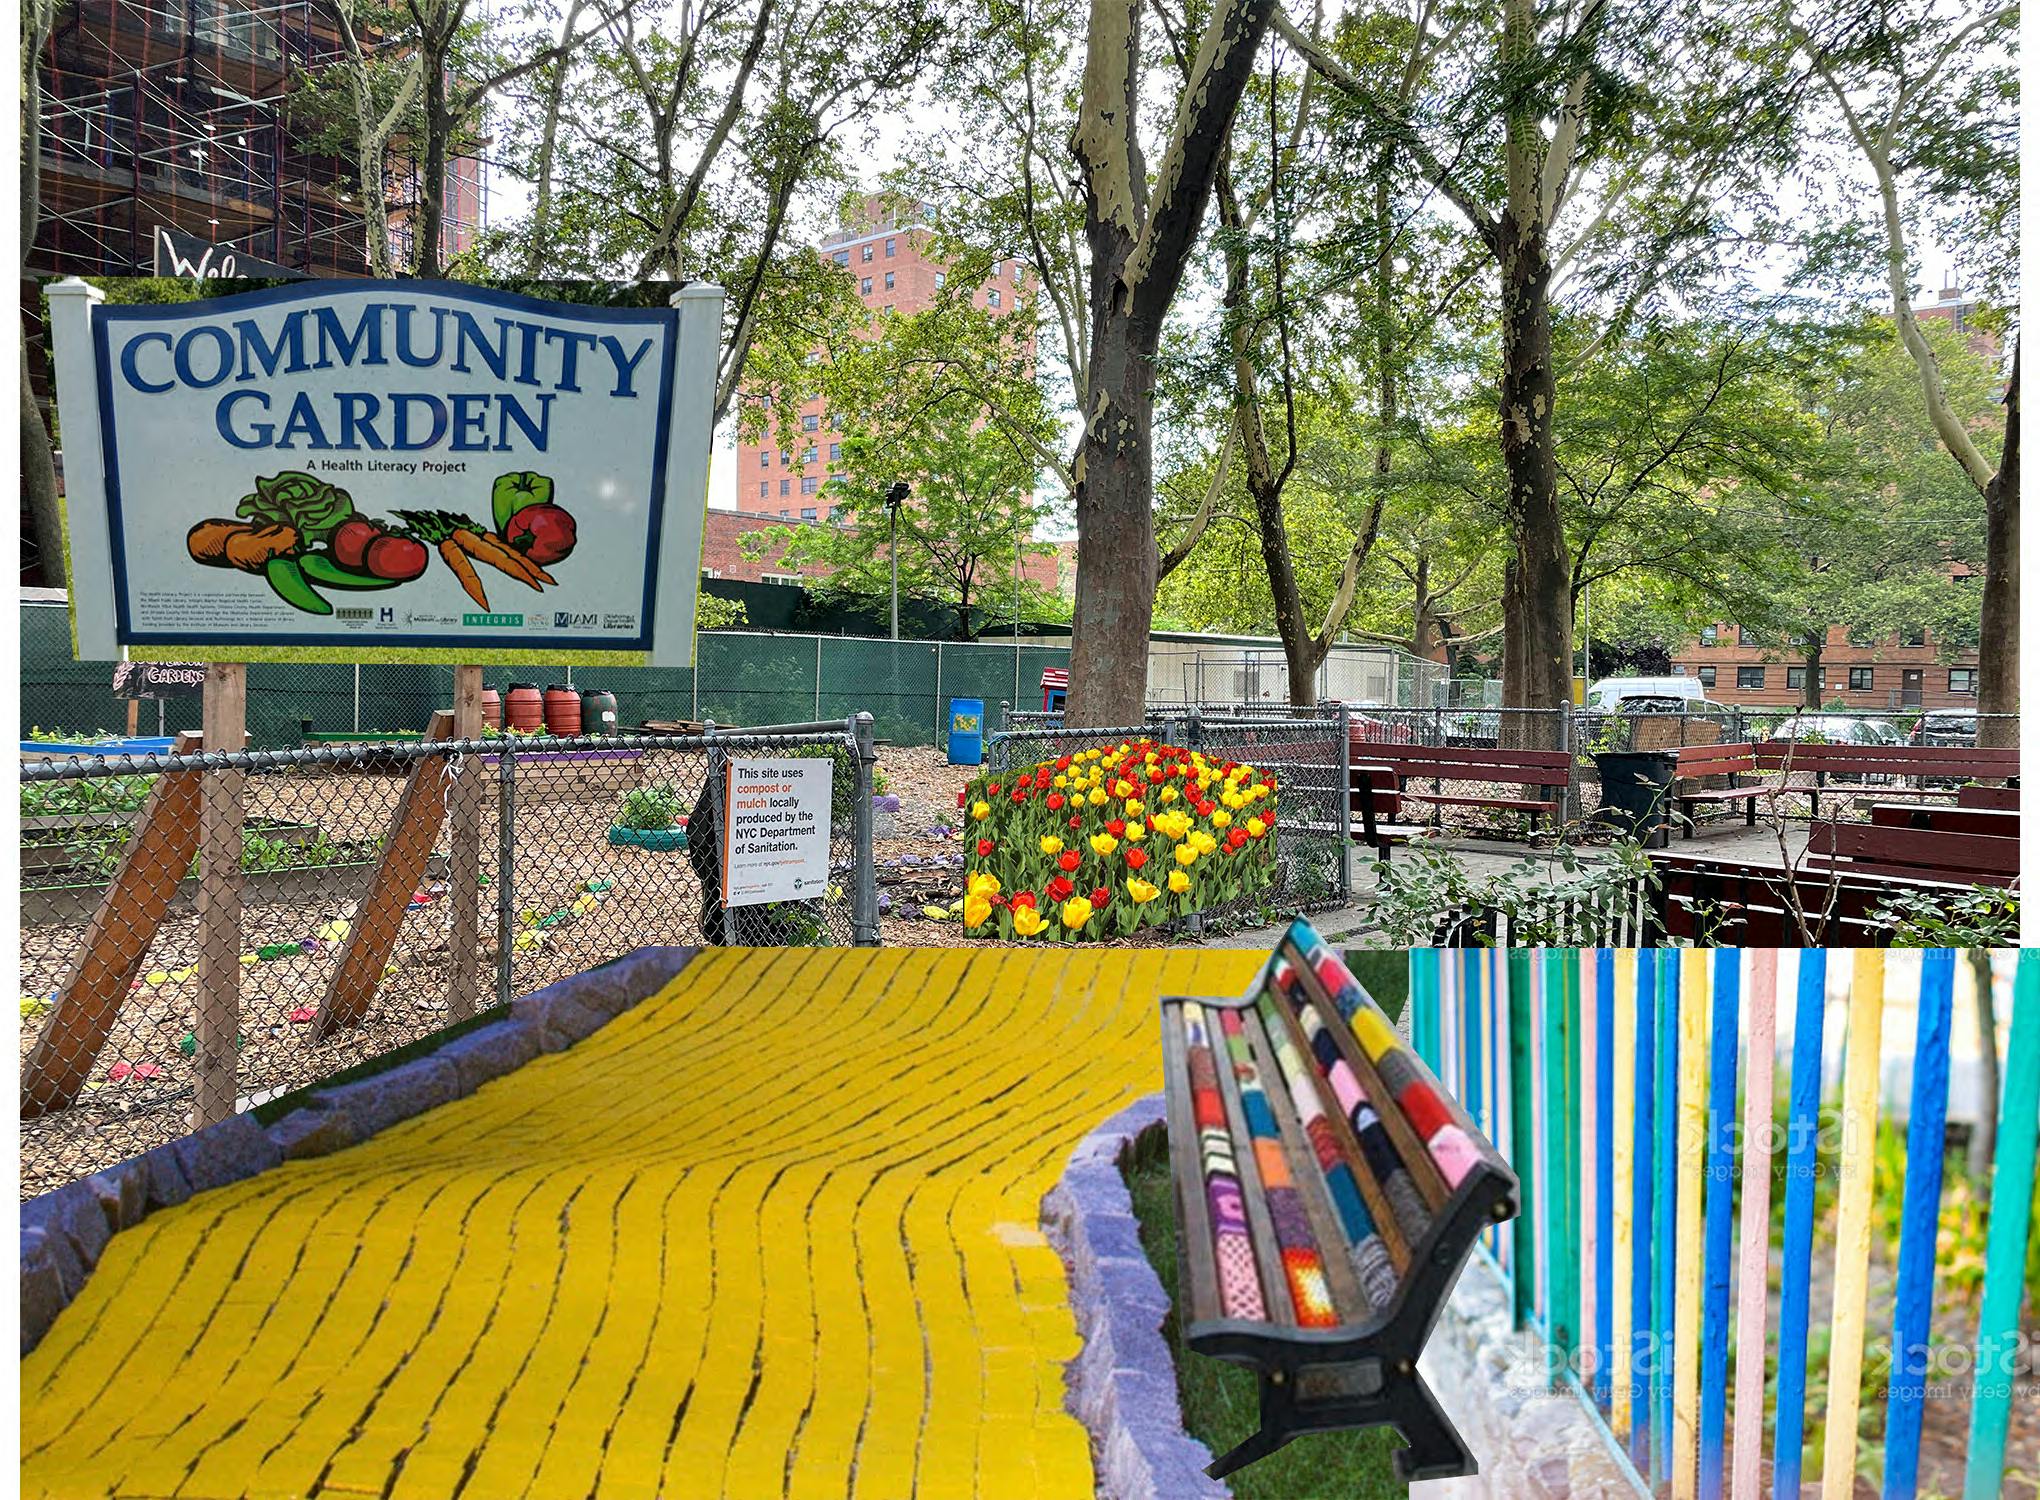 Young resident designer Aboubaker Cherry envisions community spaces with color, nature. and culturally relevant designs. For him, “the painting of the bench…symbolizes a tribal cultural thing.” He concludes, “I am pretty sure if you saw that bench right now on your way home, you would sit down.”